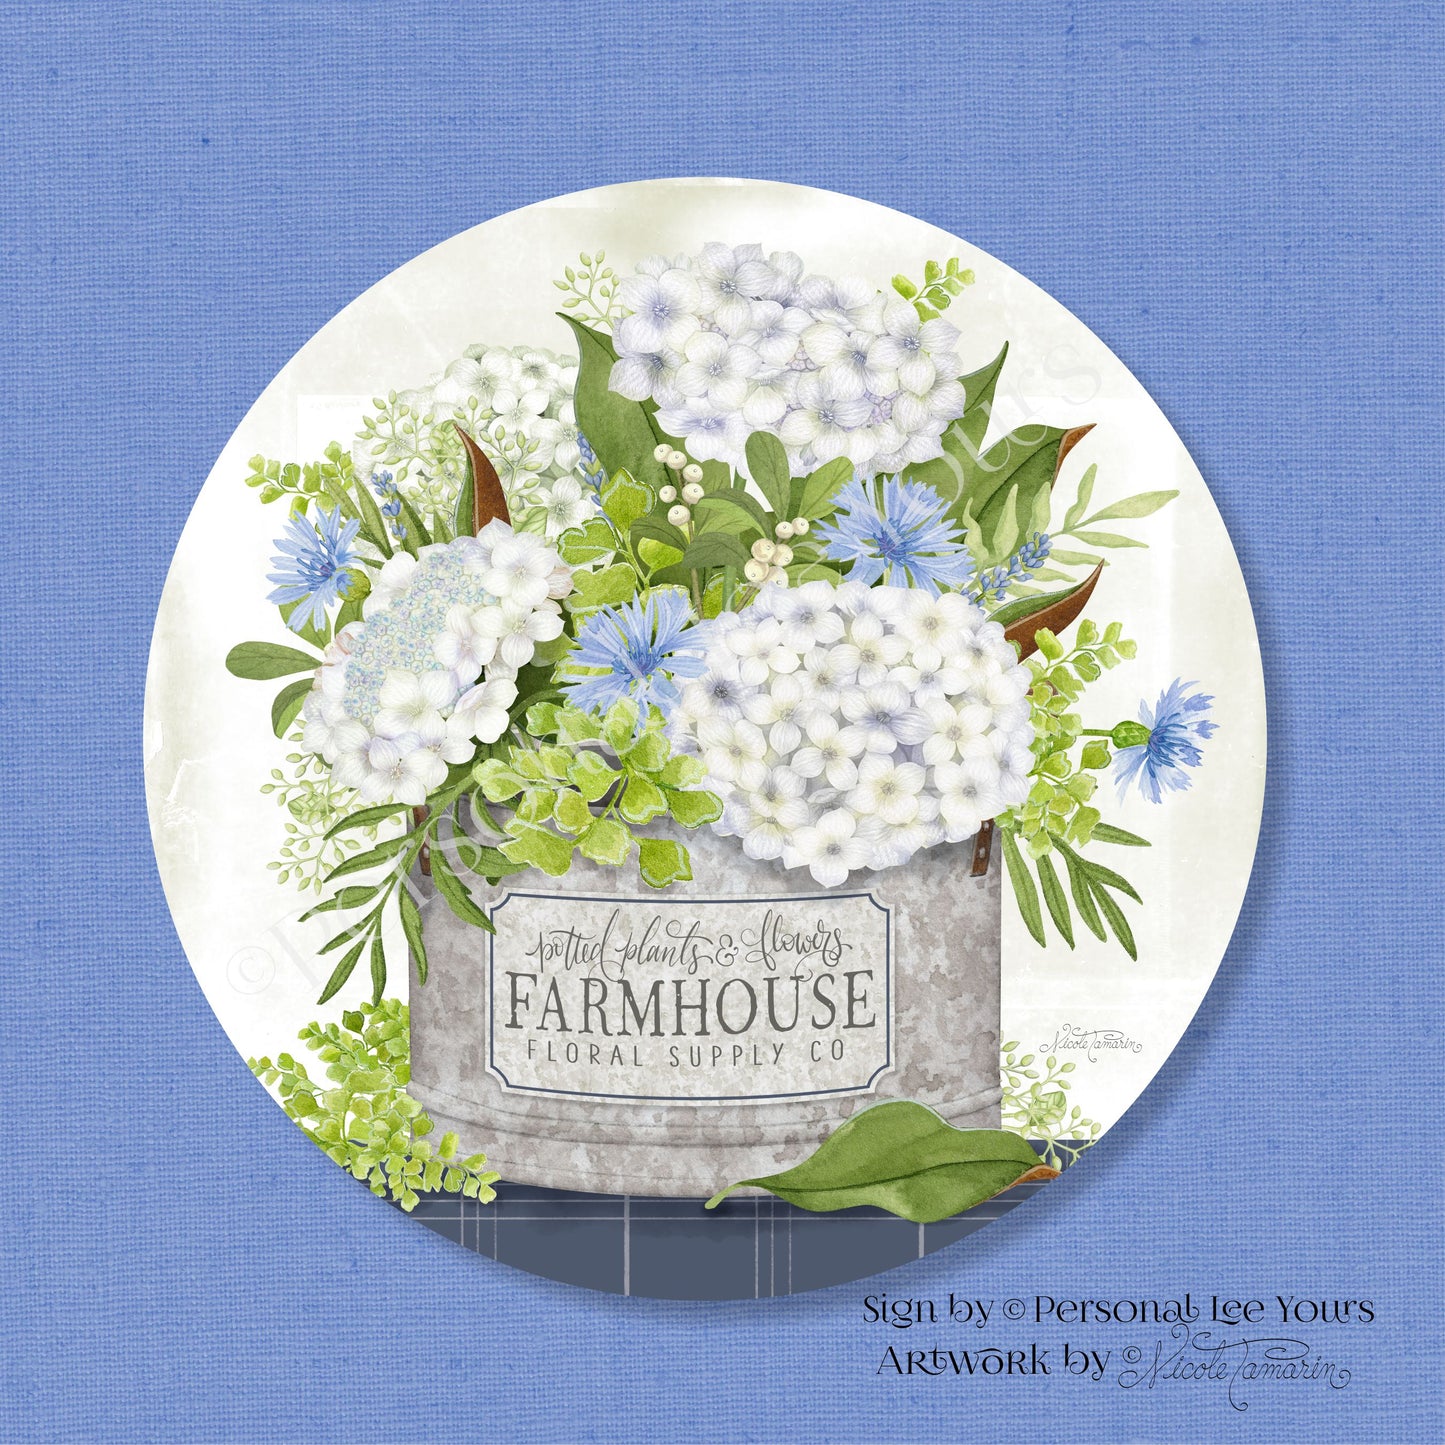 Nicole Tamarin Exclusive Sign * Farmhouse Floral Supply Co. * Round * Lightweight Metal